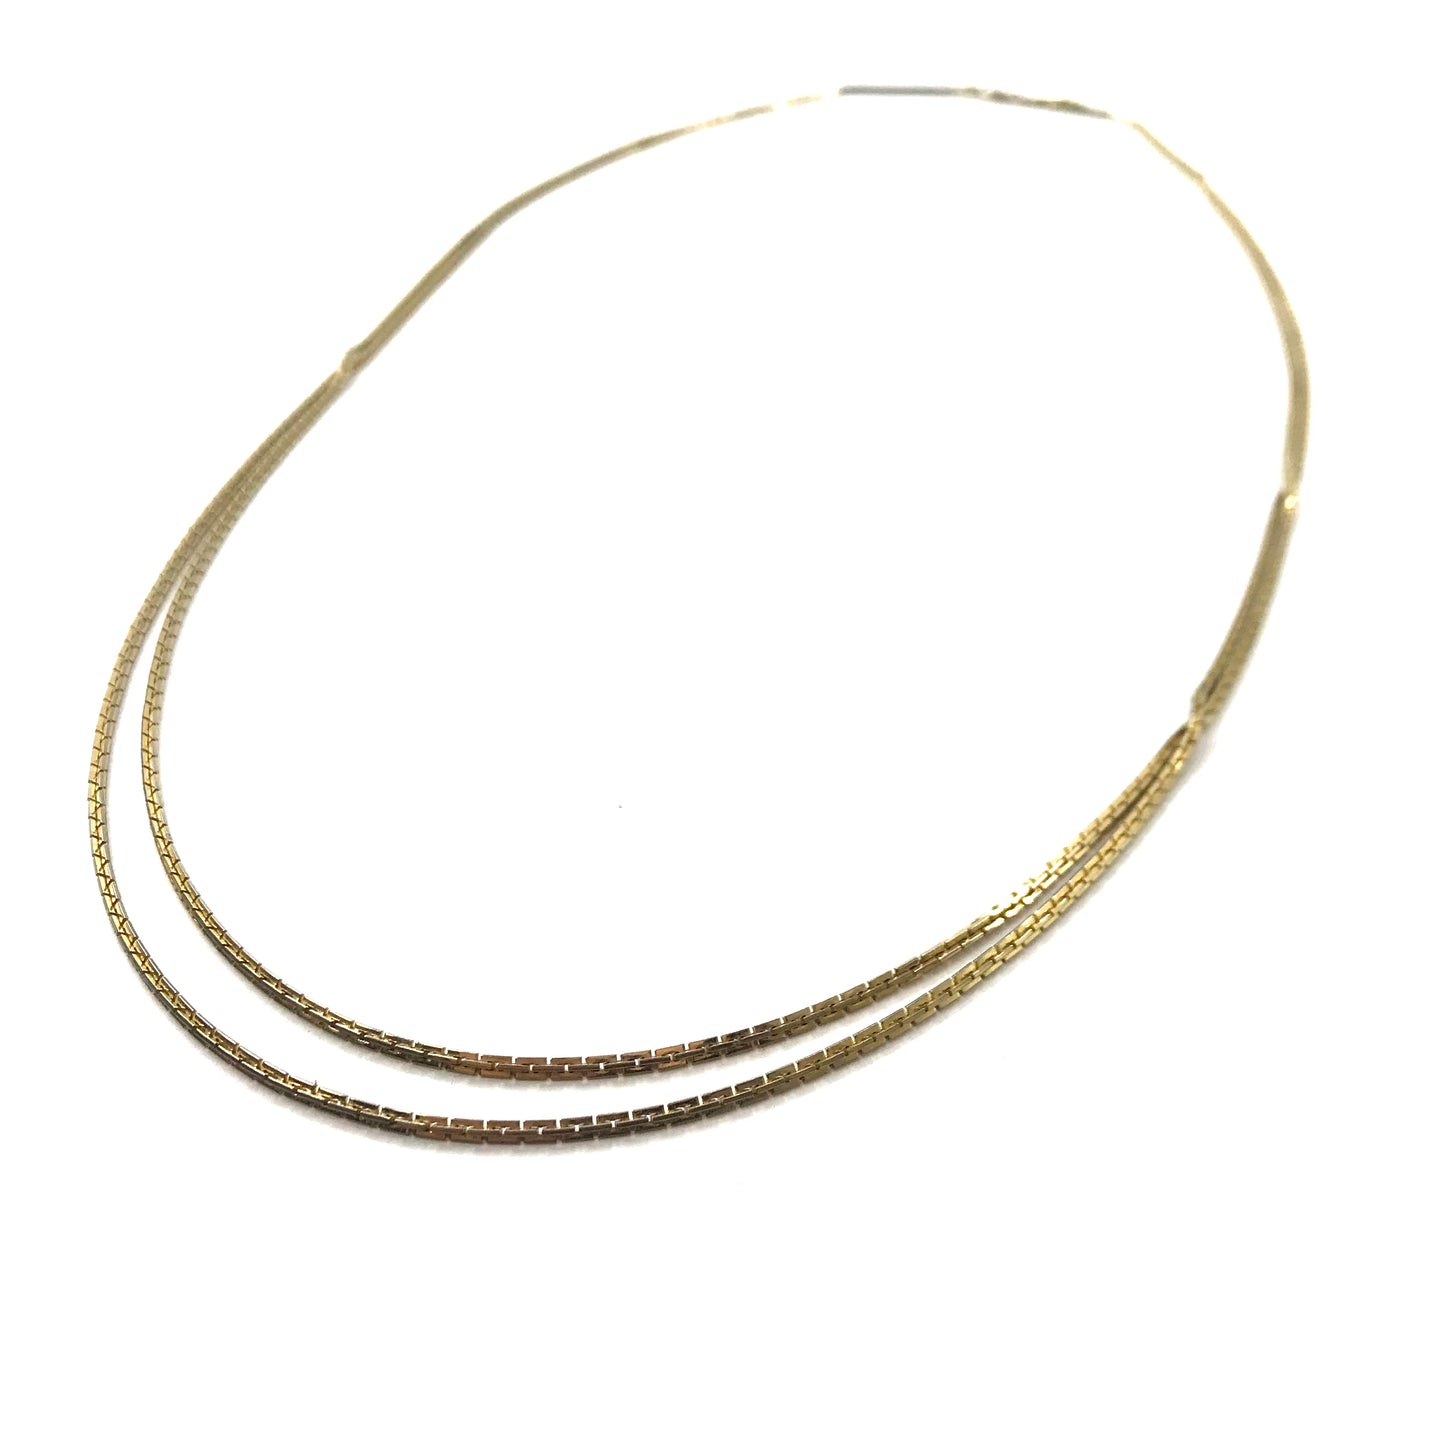 VINTAGE Long Gold Chain Necklaces ロングゴールドチェーンネックレス 155cm